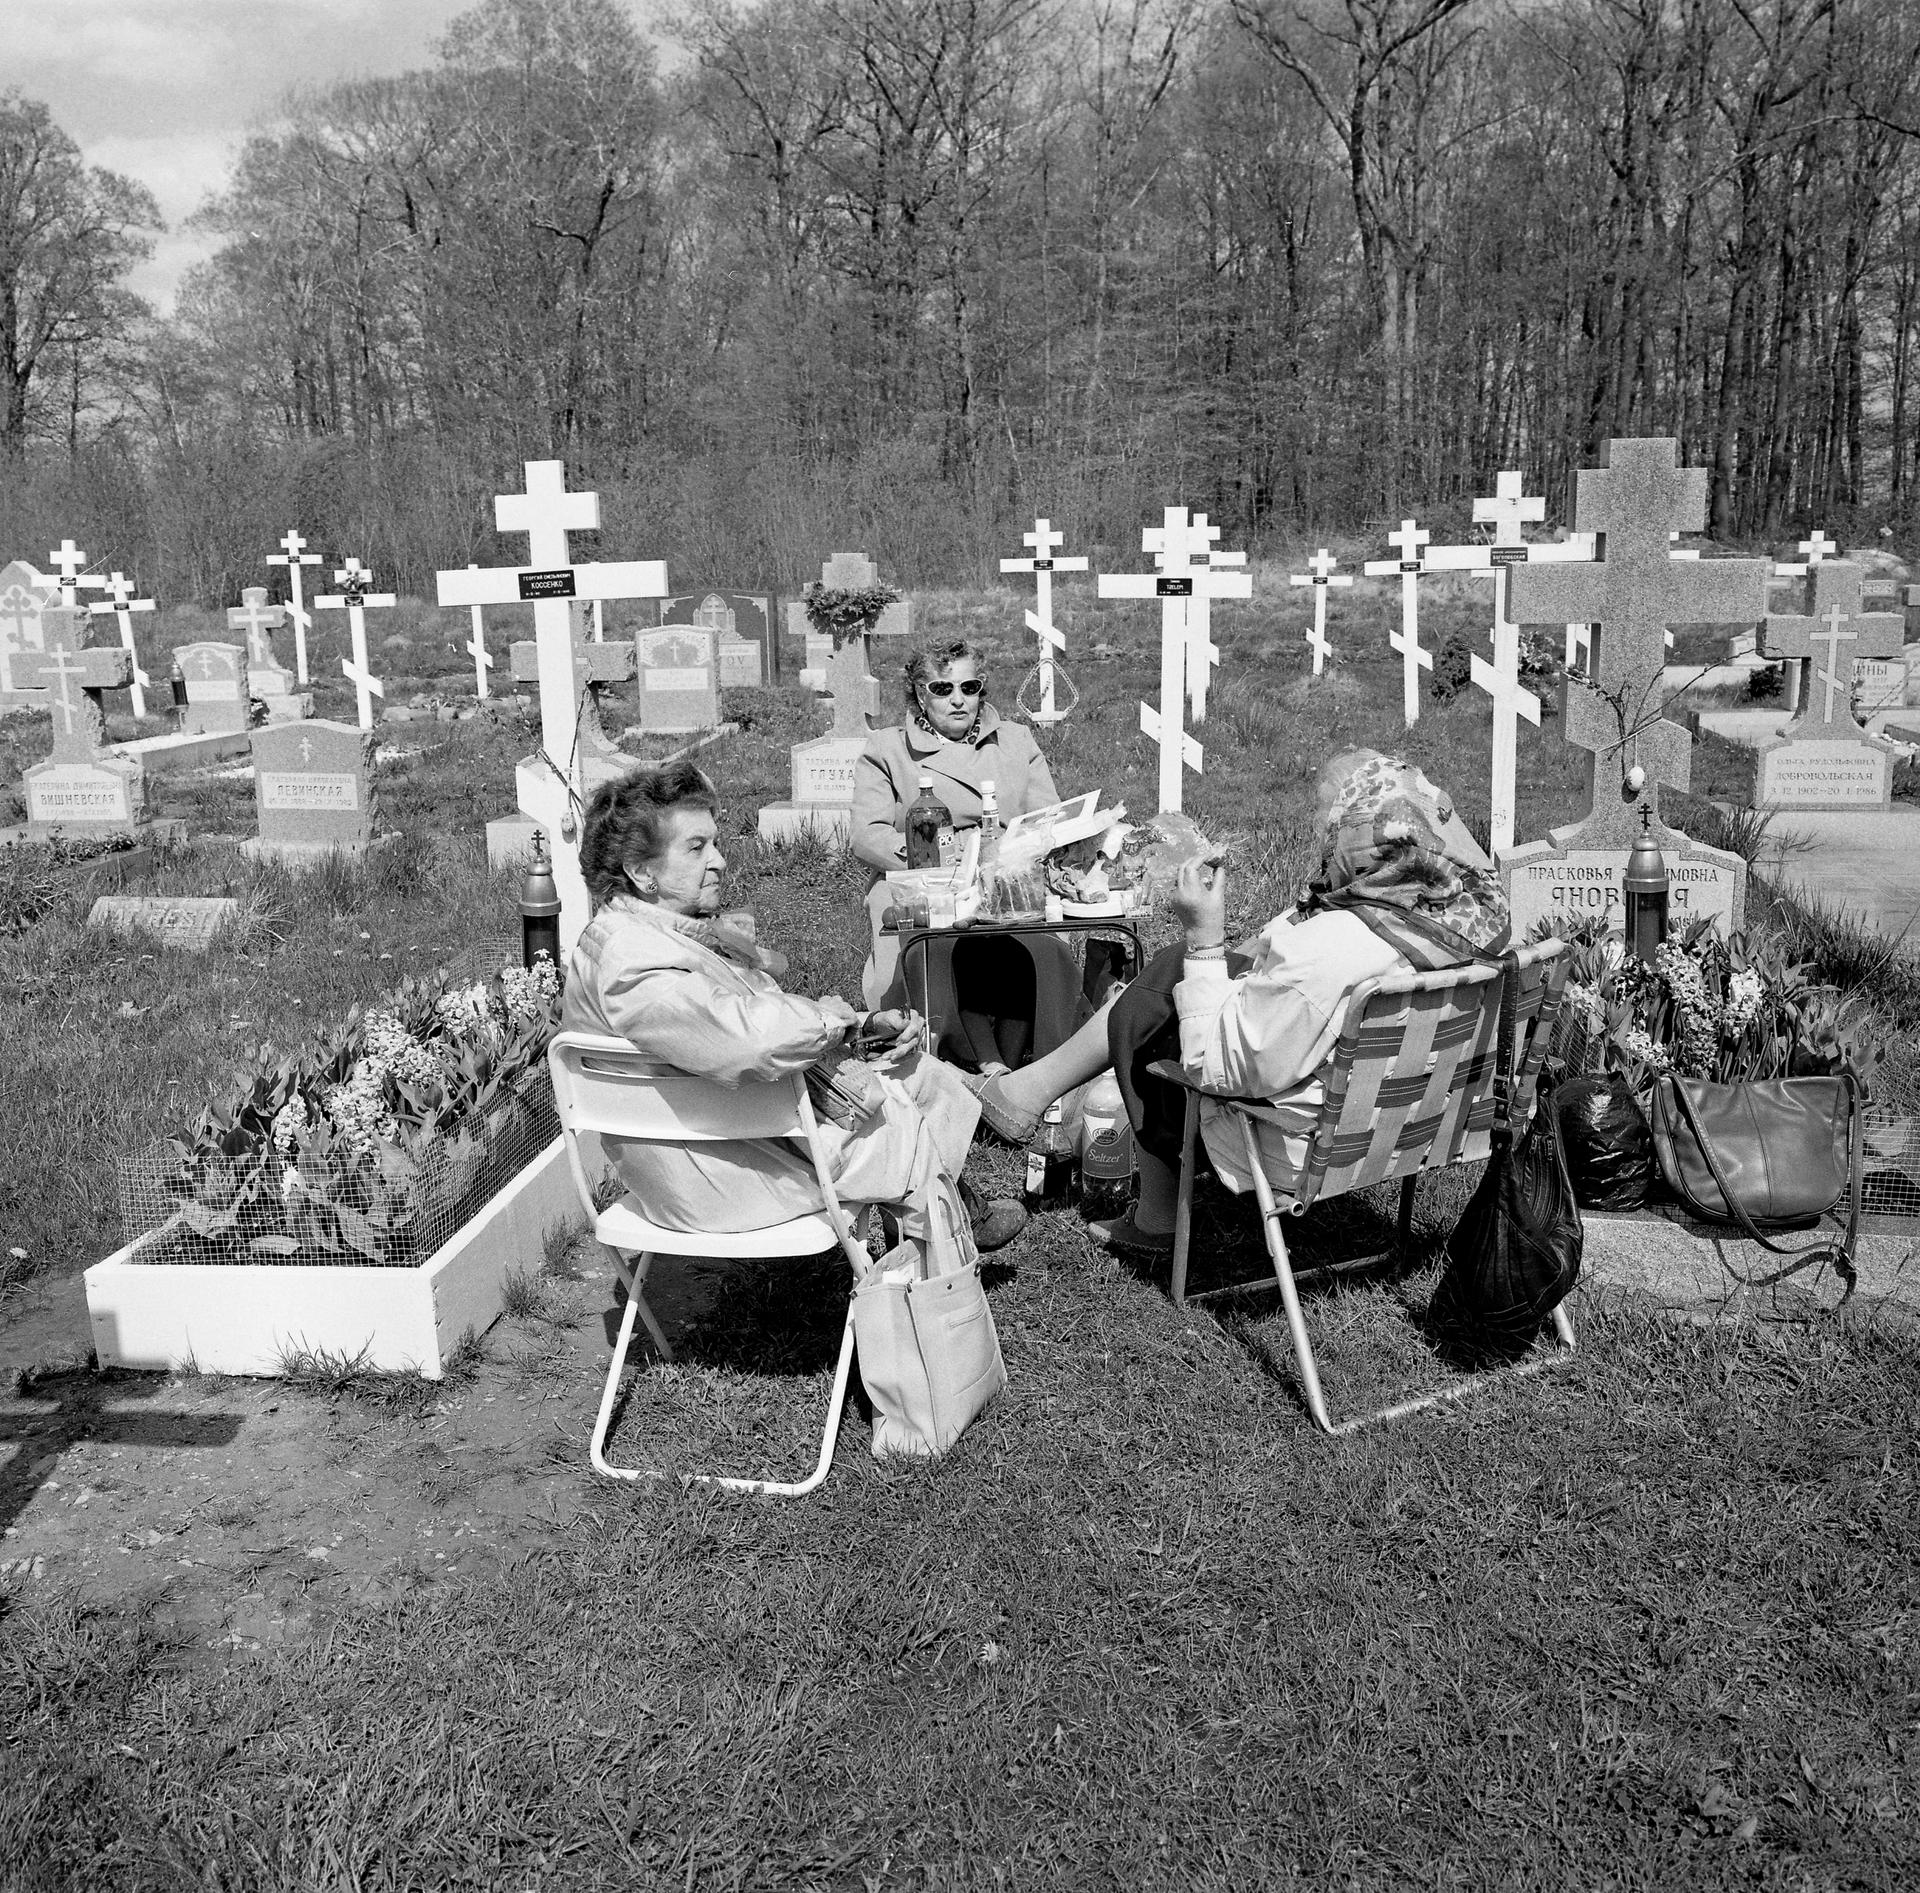 Social gathering and sharing a meal during Russian Easter honoring the dead, Spring Valley, New Jersey, 1997